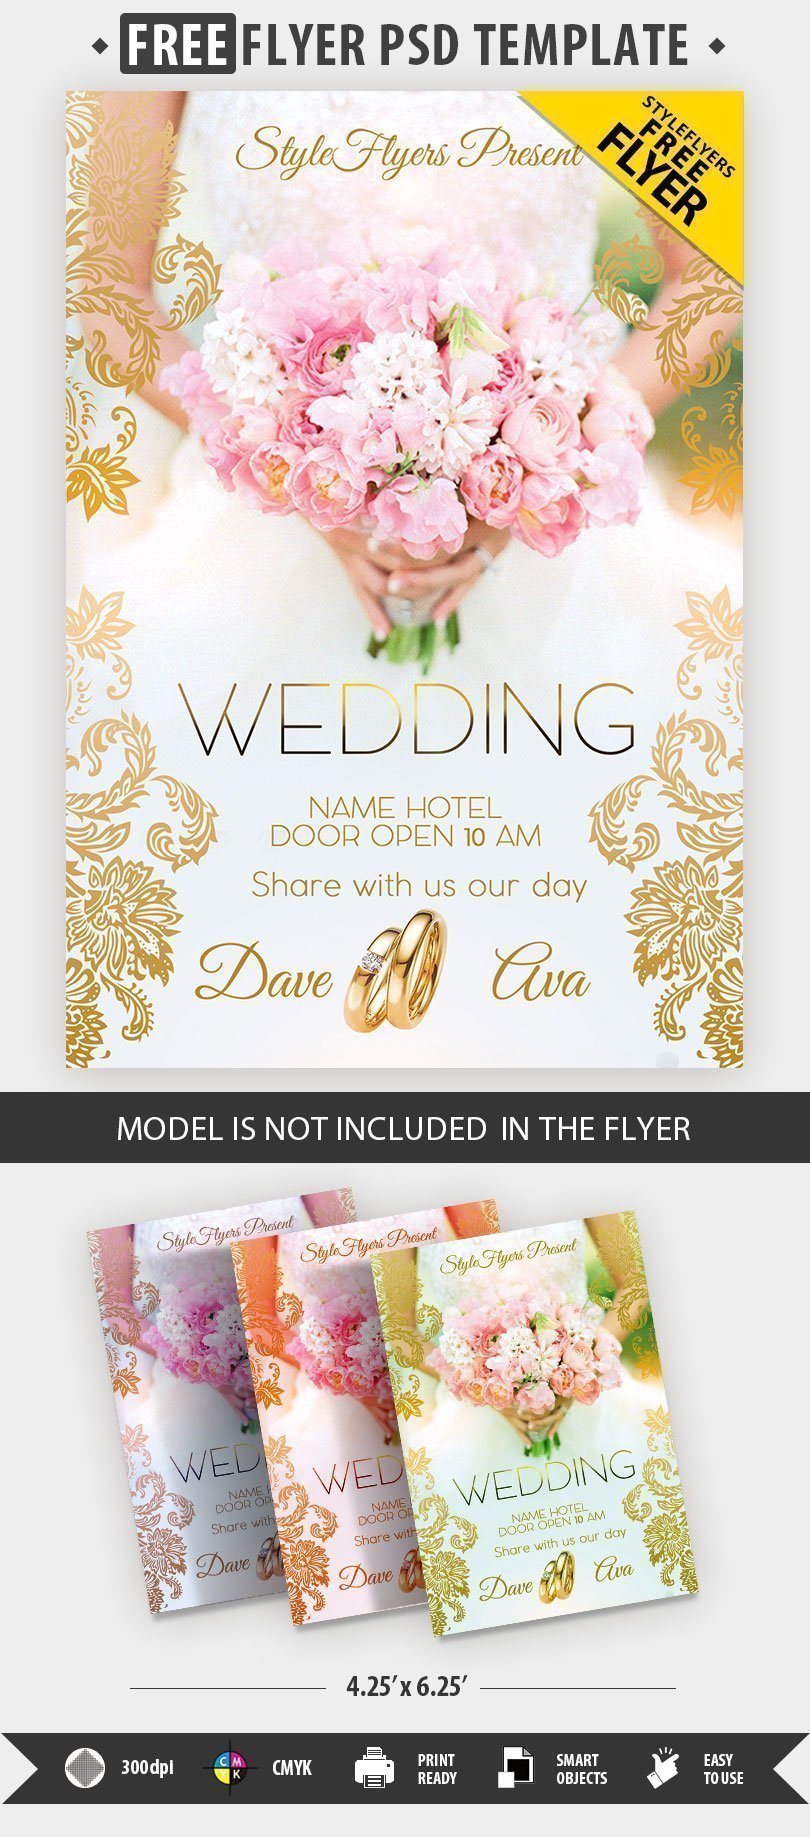 Wedding Flyer Template Free from styleflyers.com